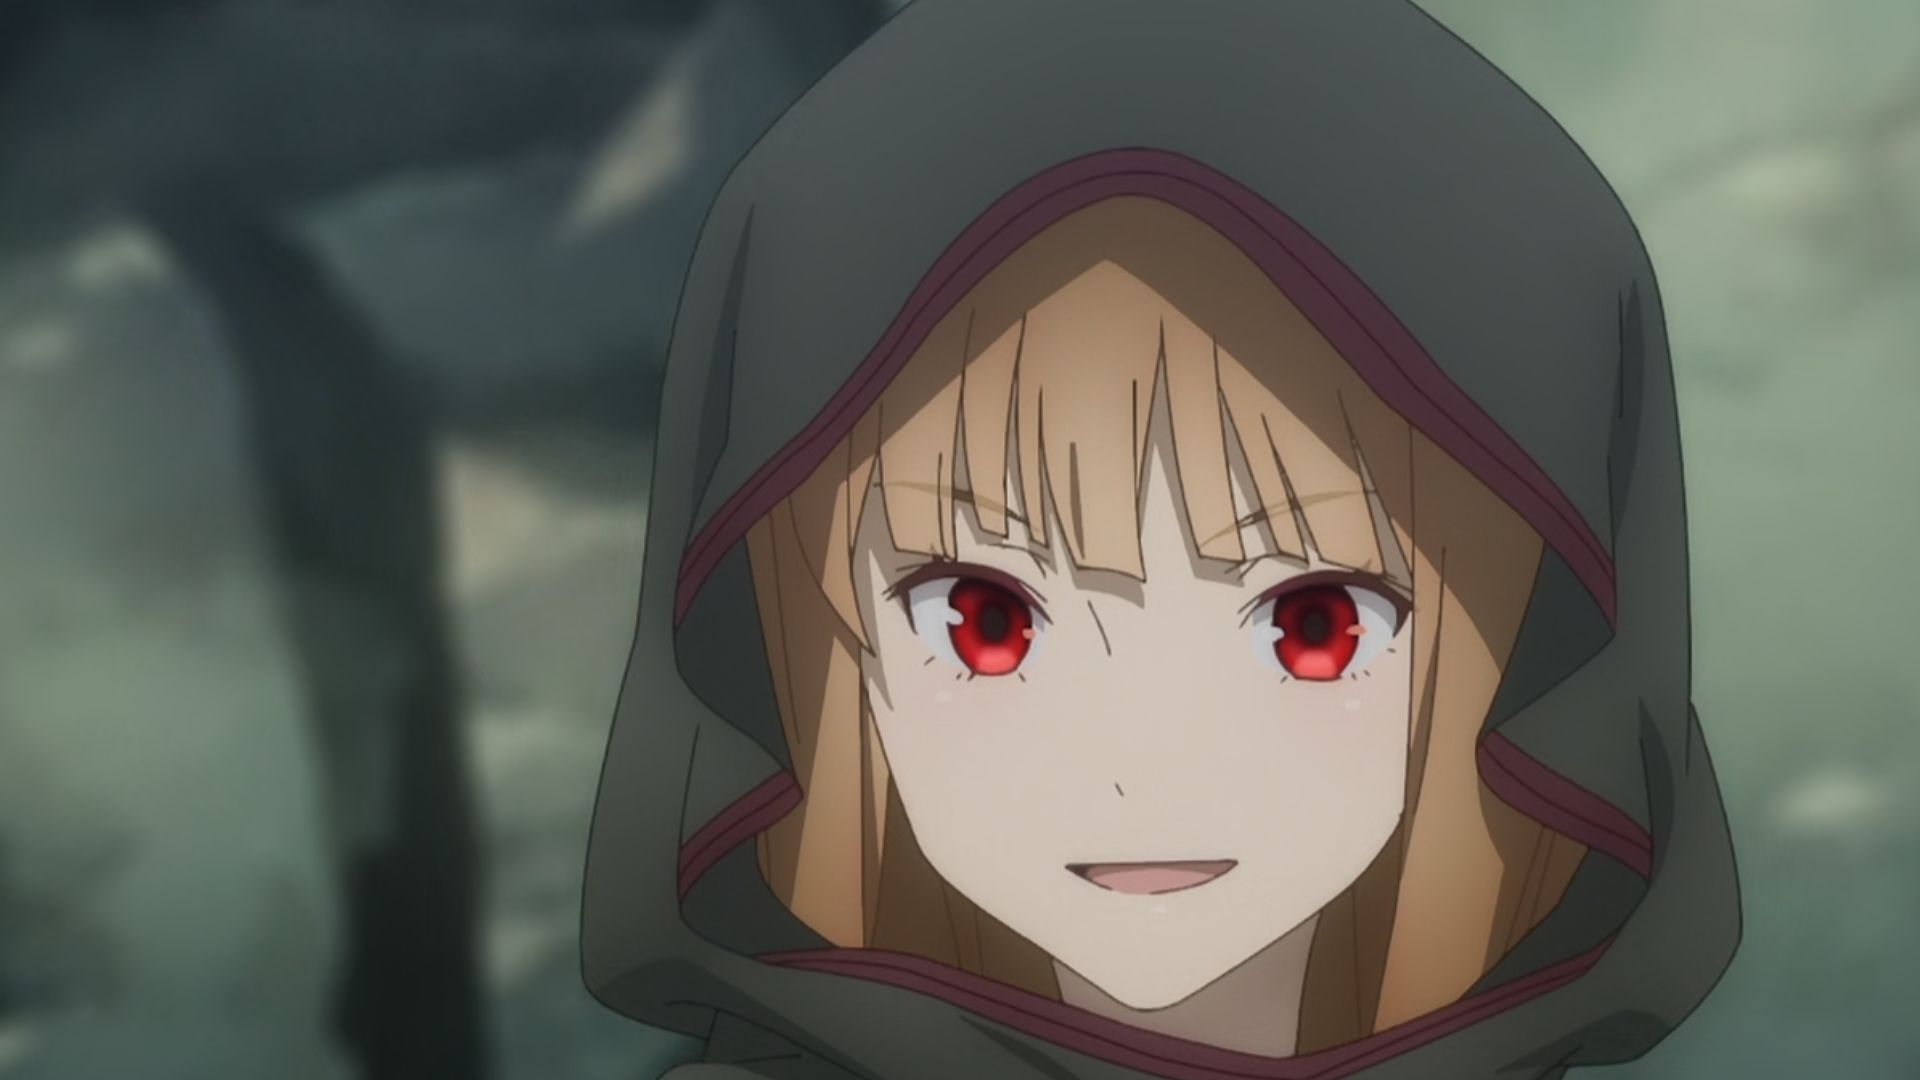 Spice and Wolf Merchant Meets The Wise Wolf Episode 12